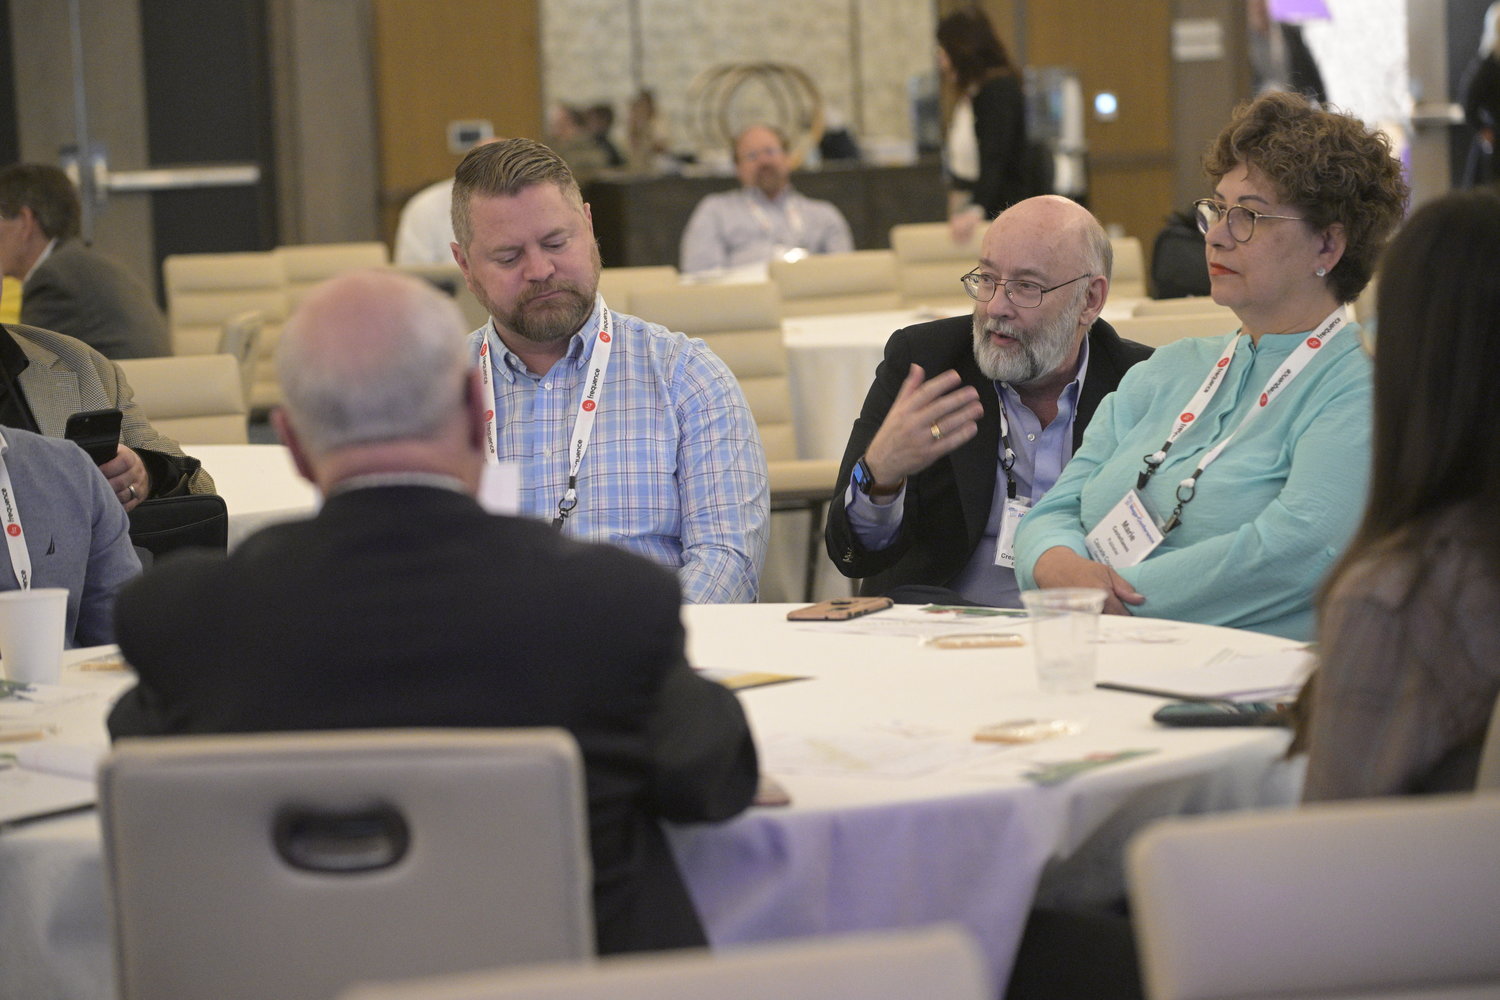 John Kimball, owner of The John Kimball Group, led a great Roundtable designed to help newspapers gain political ad dollars. (Photo by Phelan M. Ebenhack)